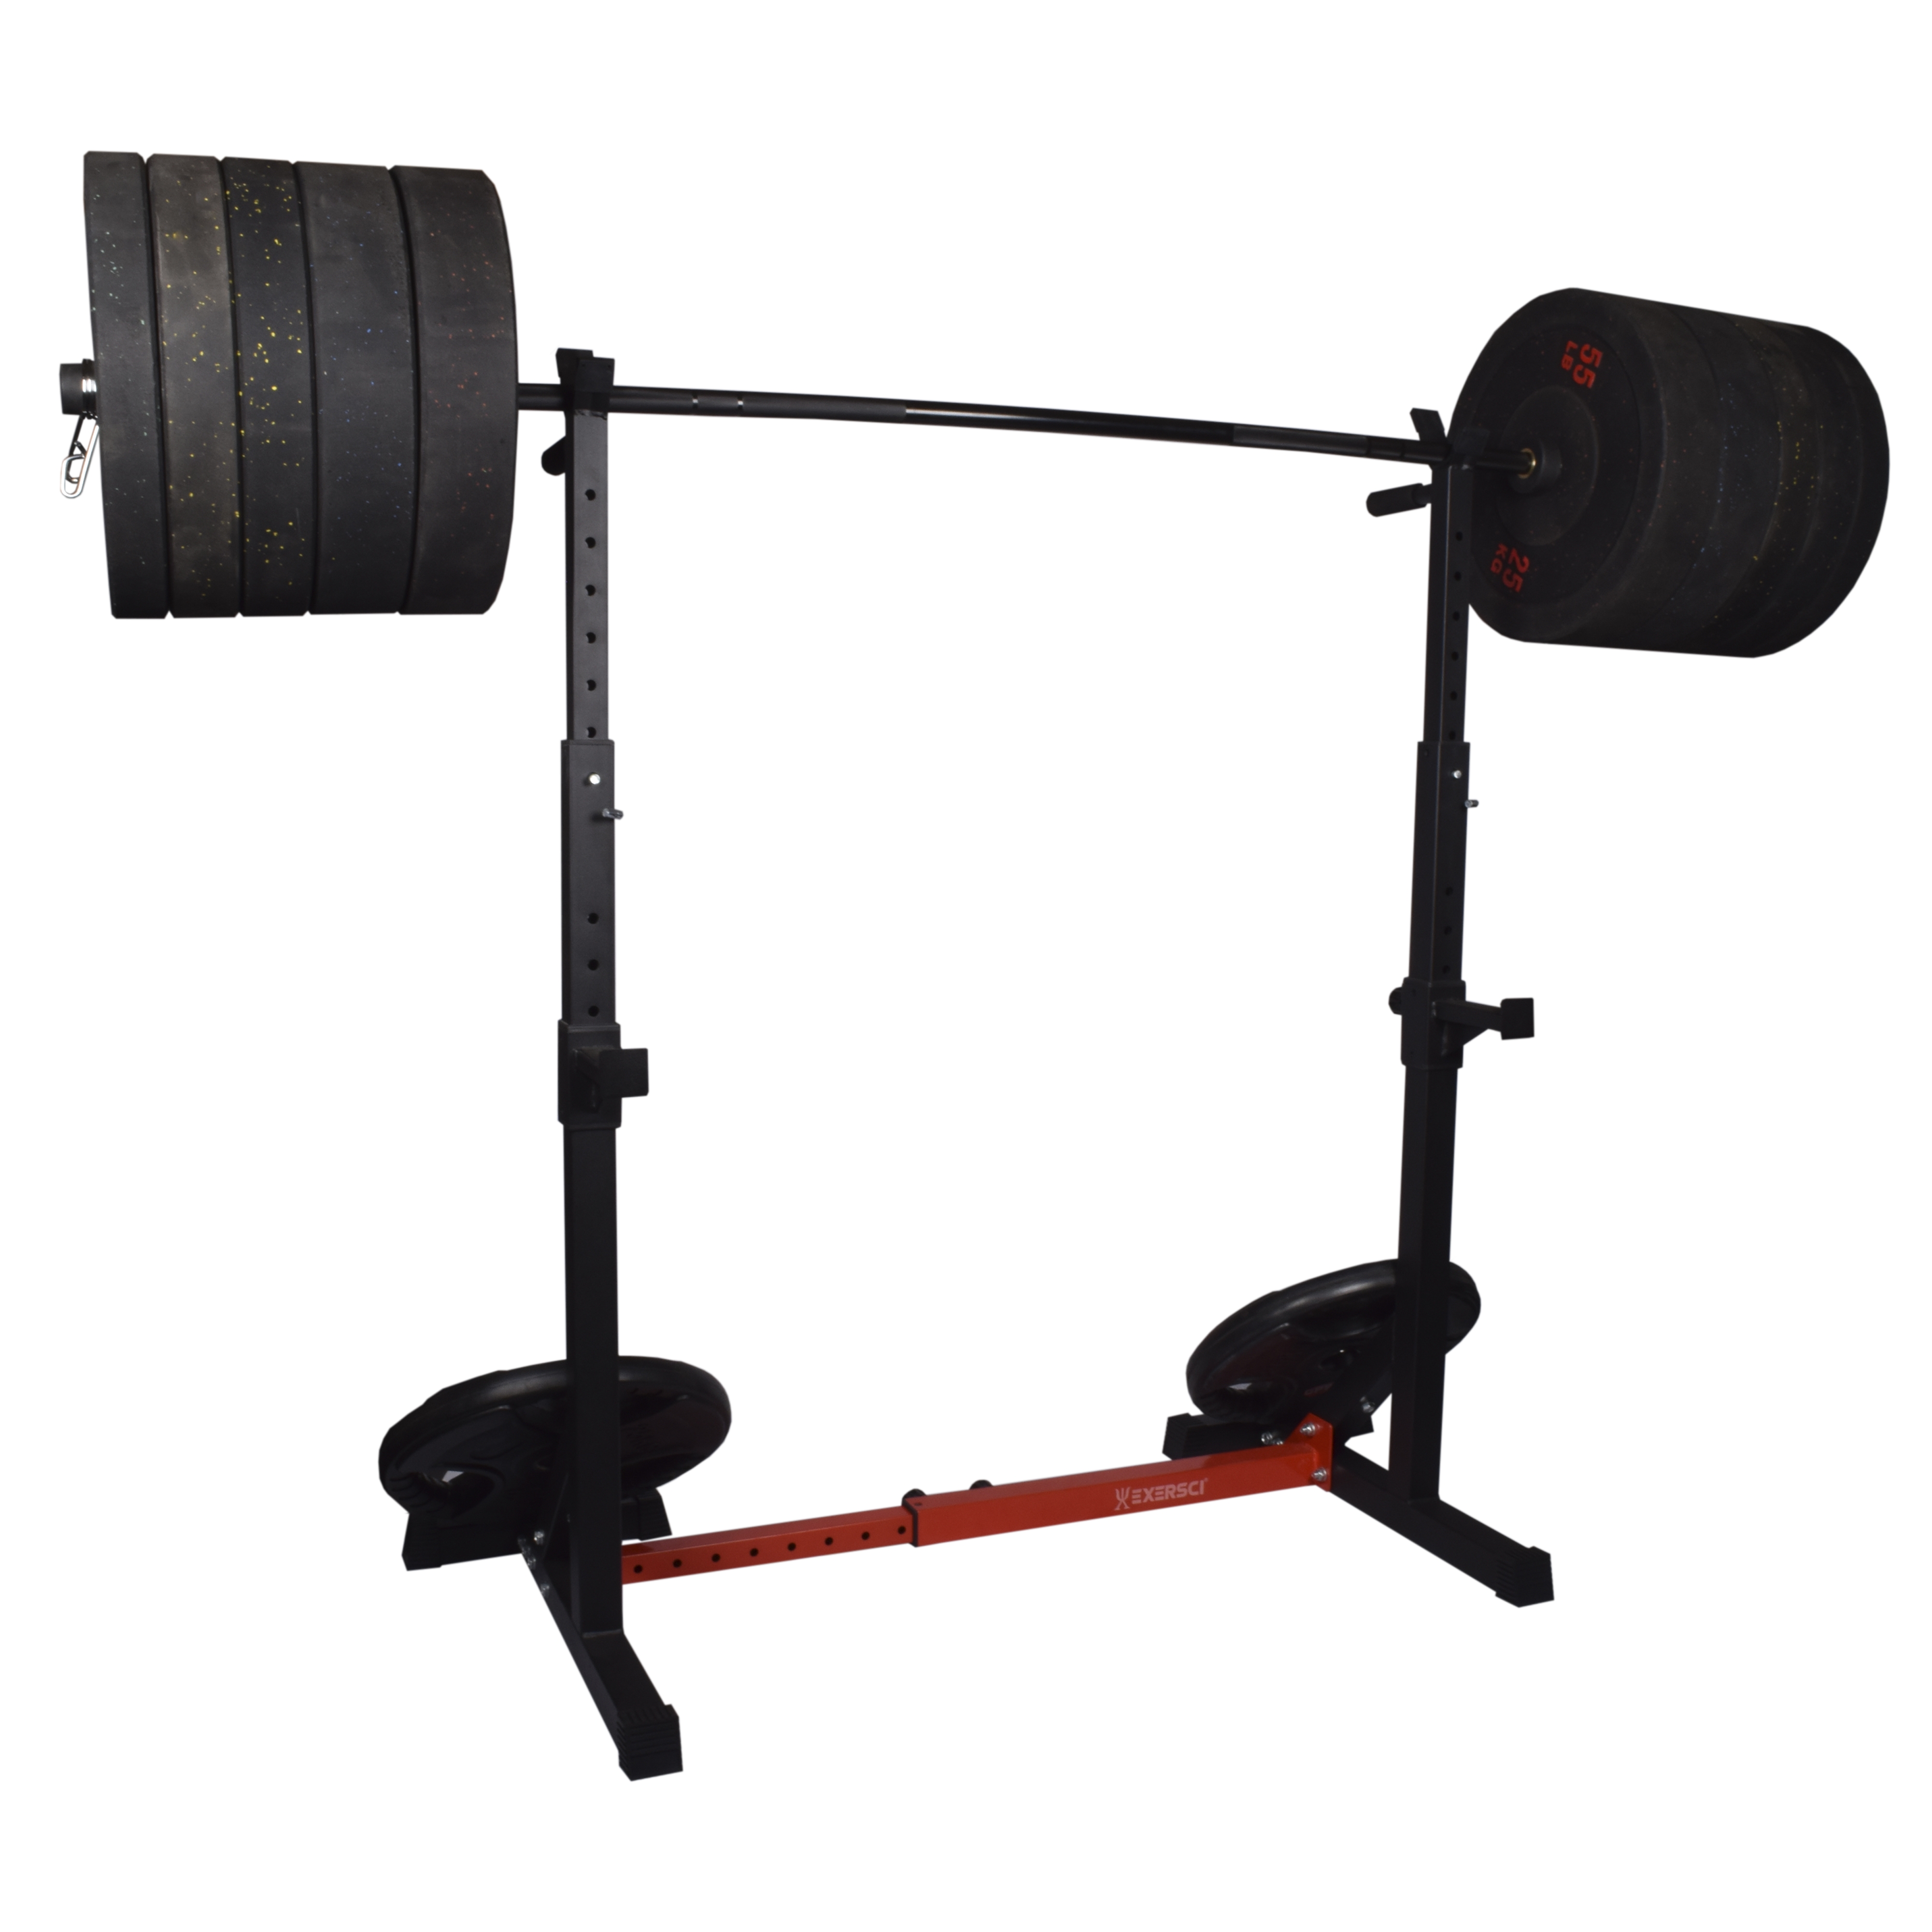 Exersci Heavy Duty Squat Rack with Dips and Storage Arms